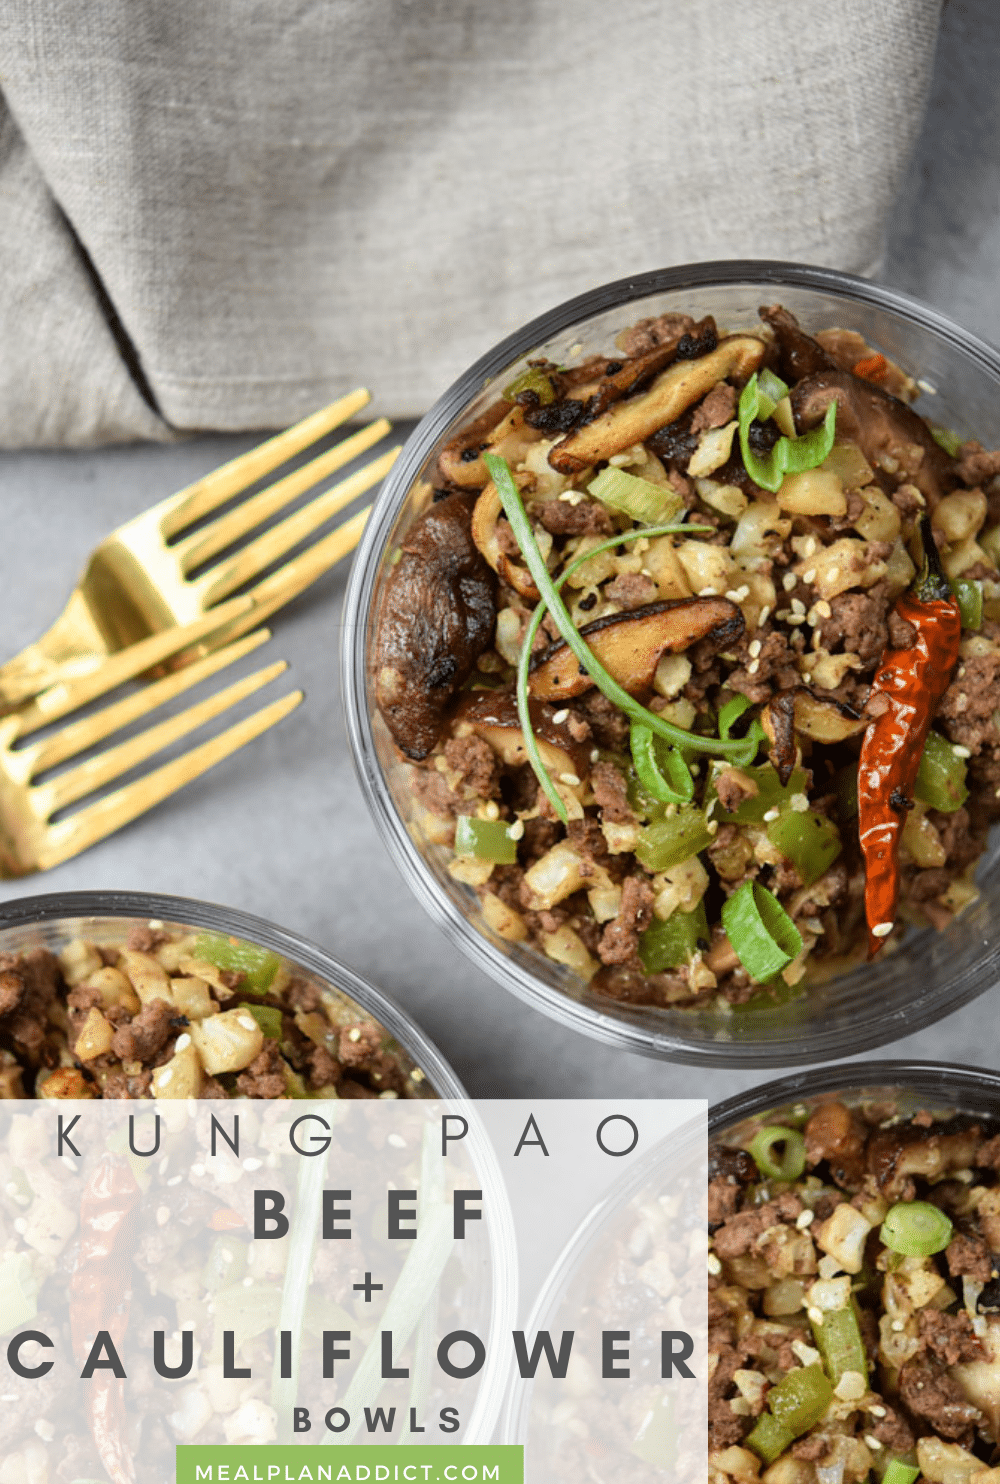 Kung pao pin for Pinterest